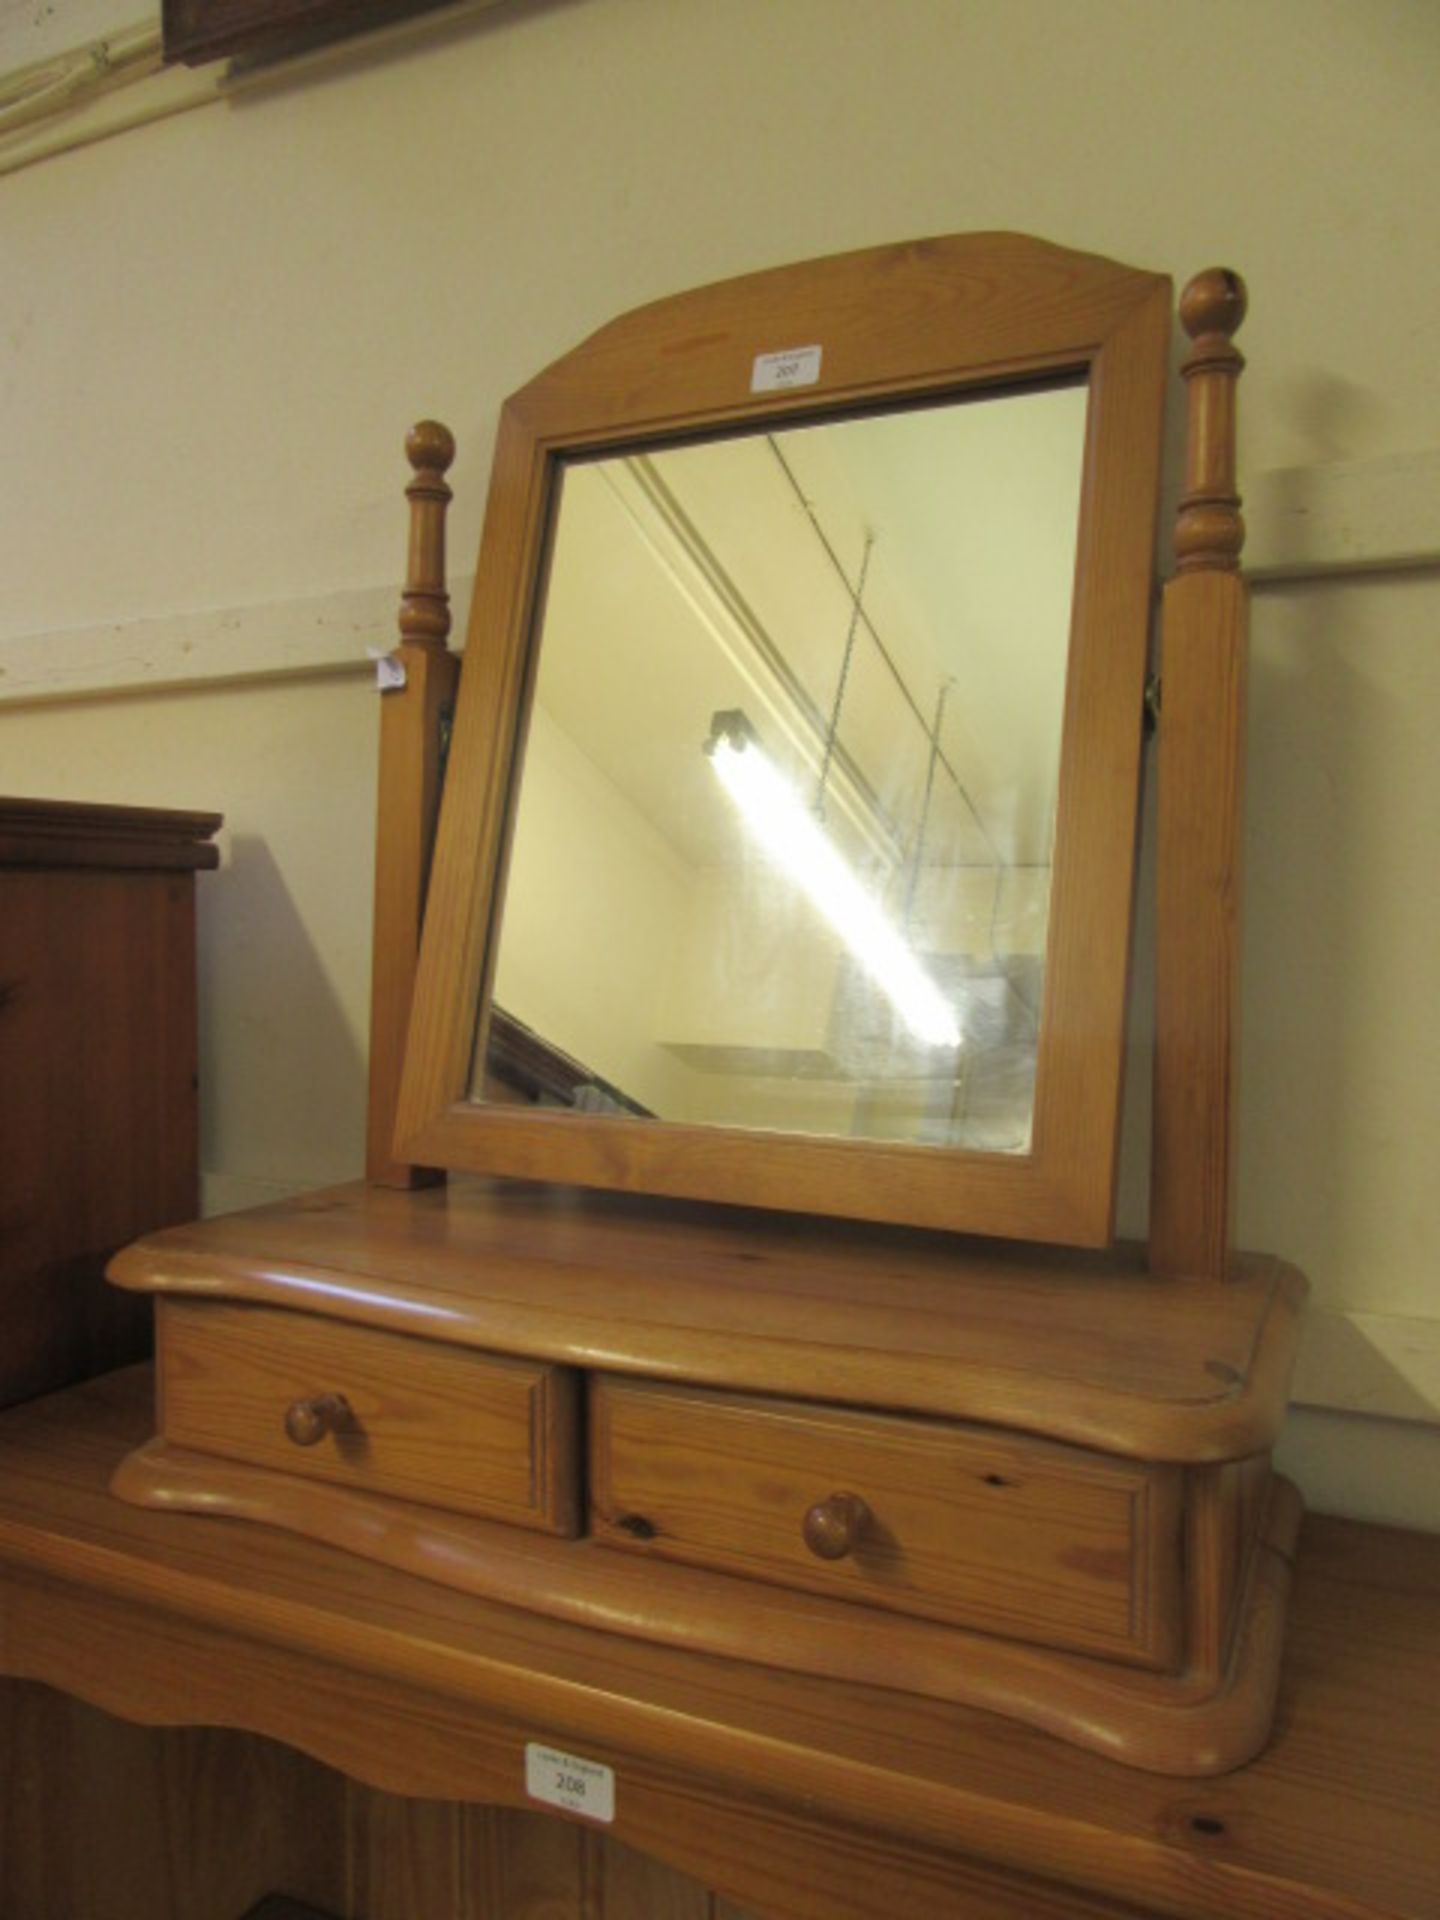 A modern pine dressing table mirror with swing mirror and two trinket drawers